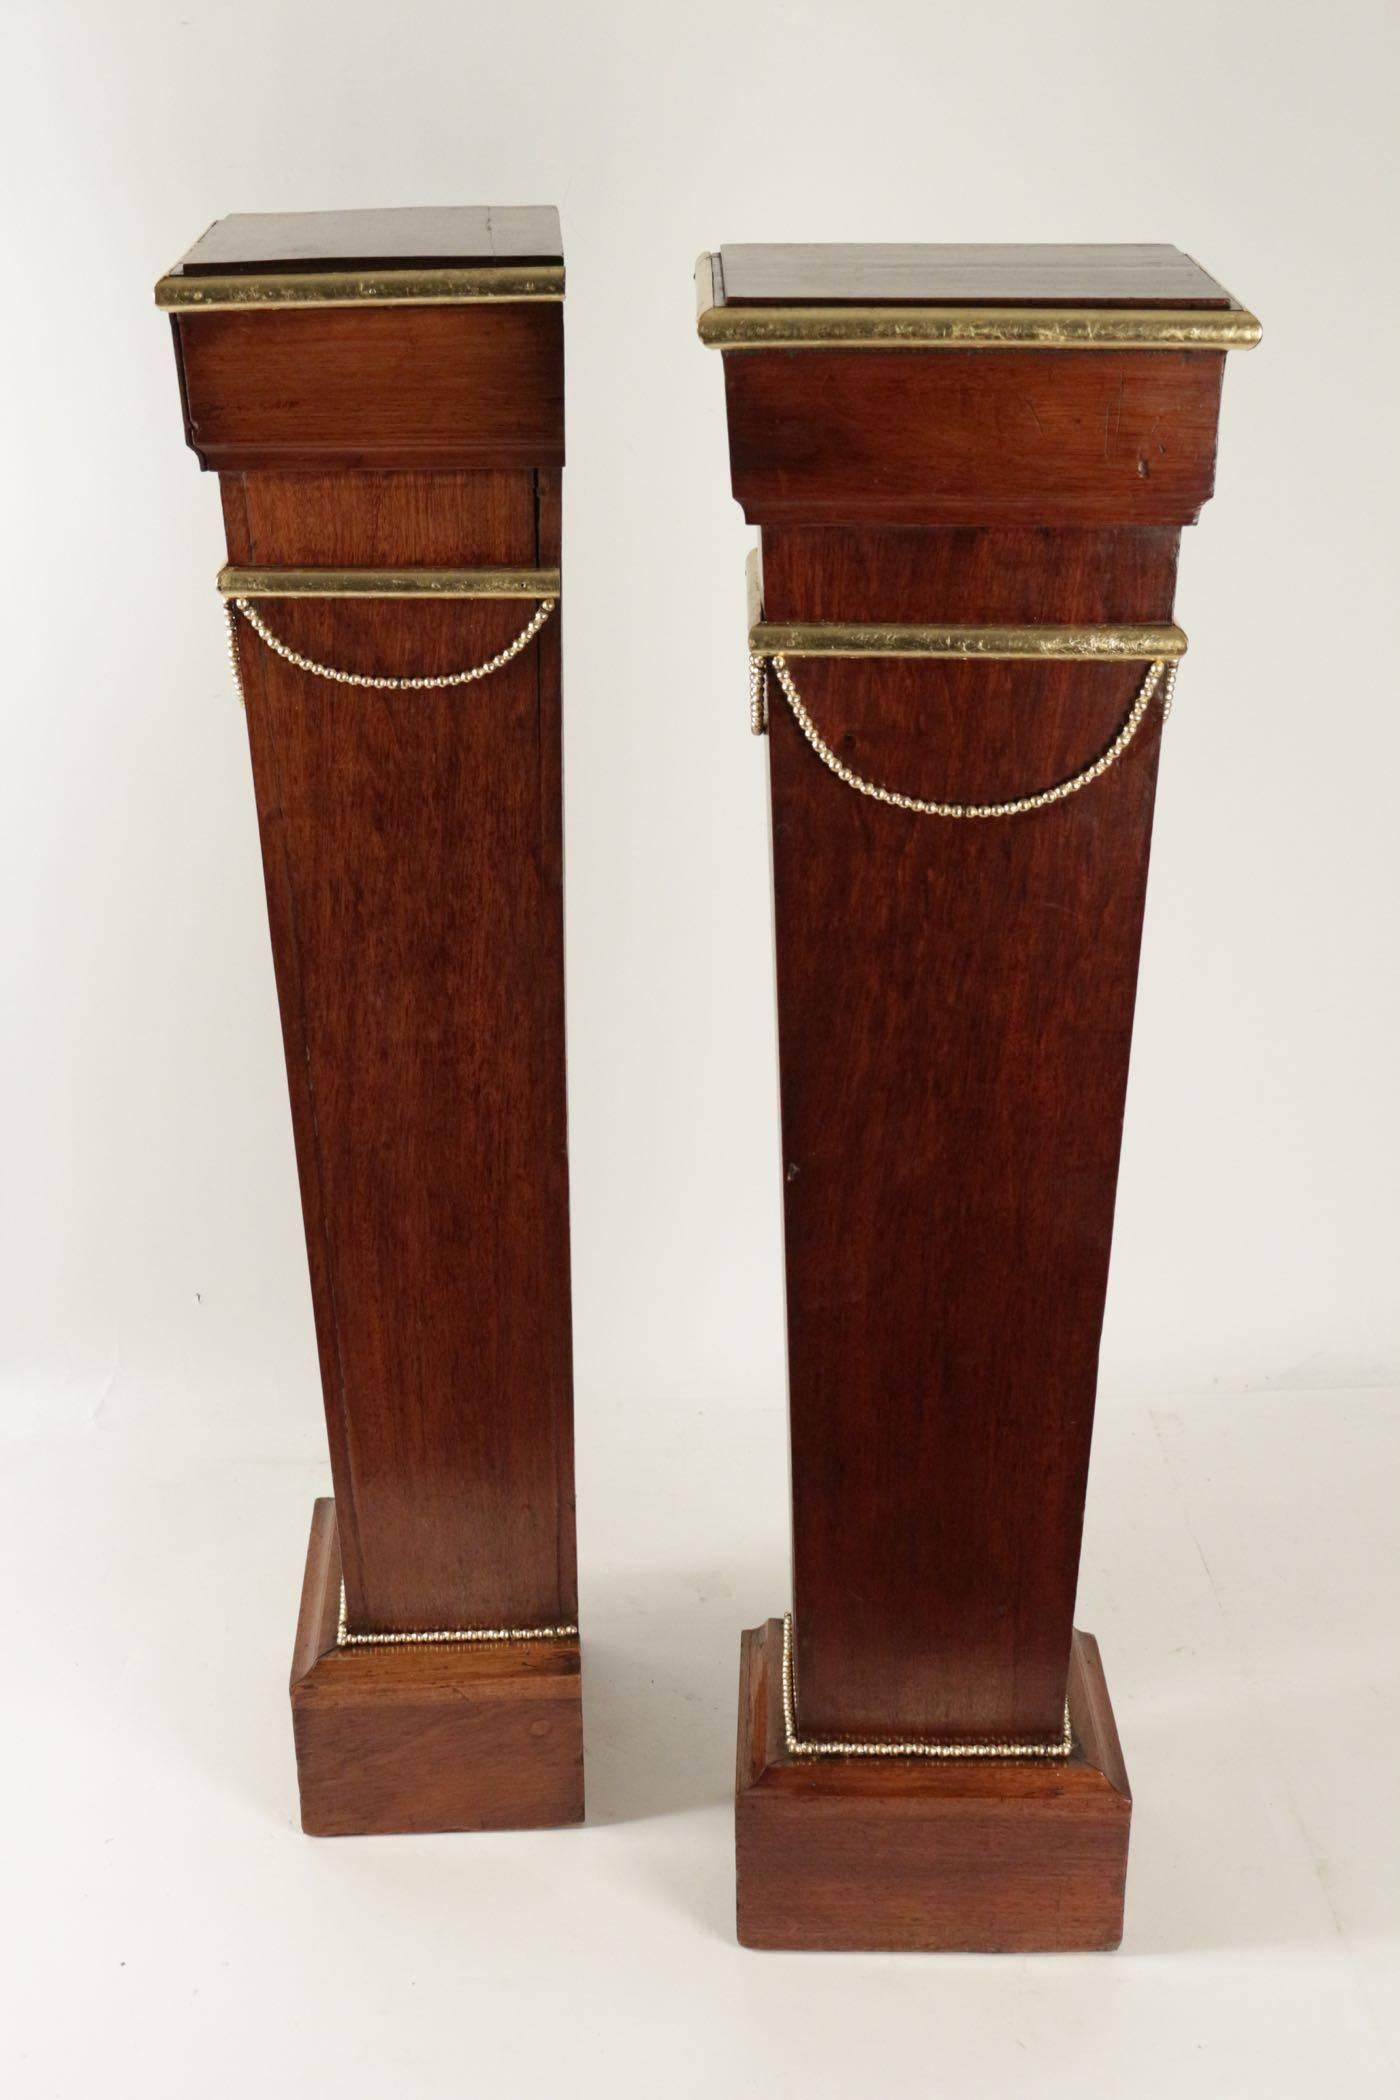 Pair of Sheaths, Consoles, Mahogany, Golden at the Gold Leaf, 19th Century 3